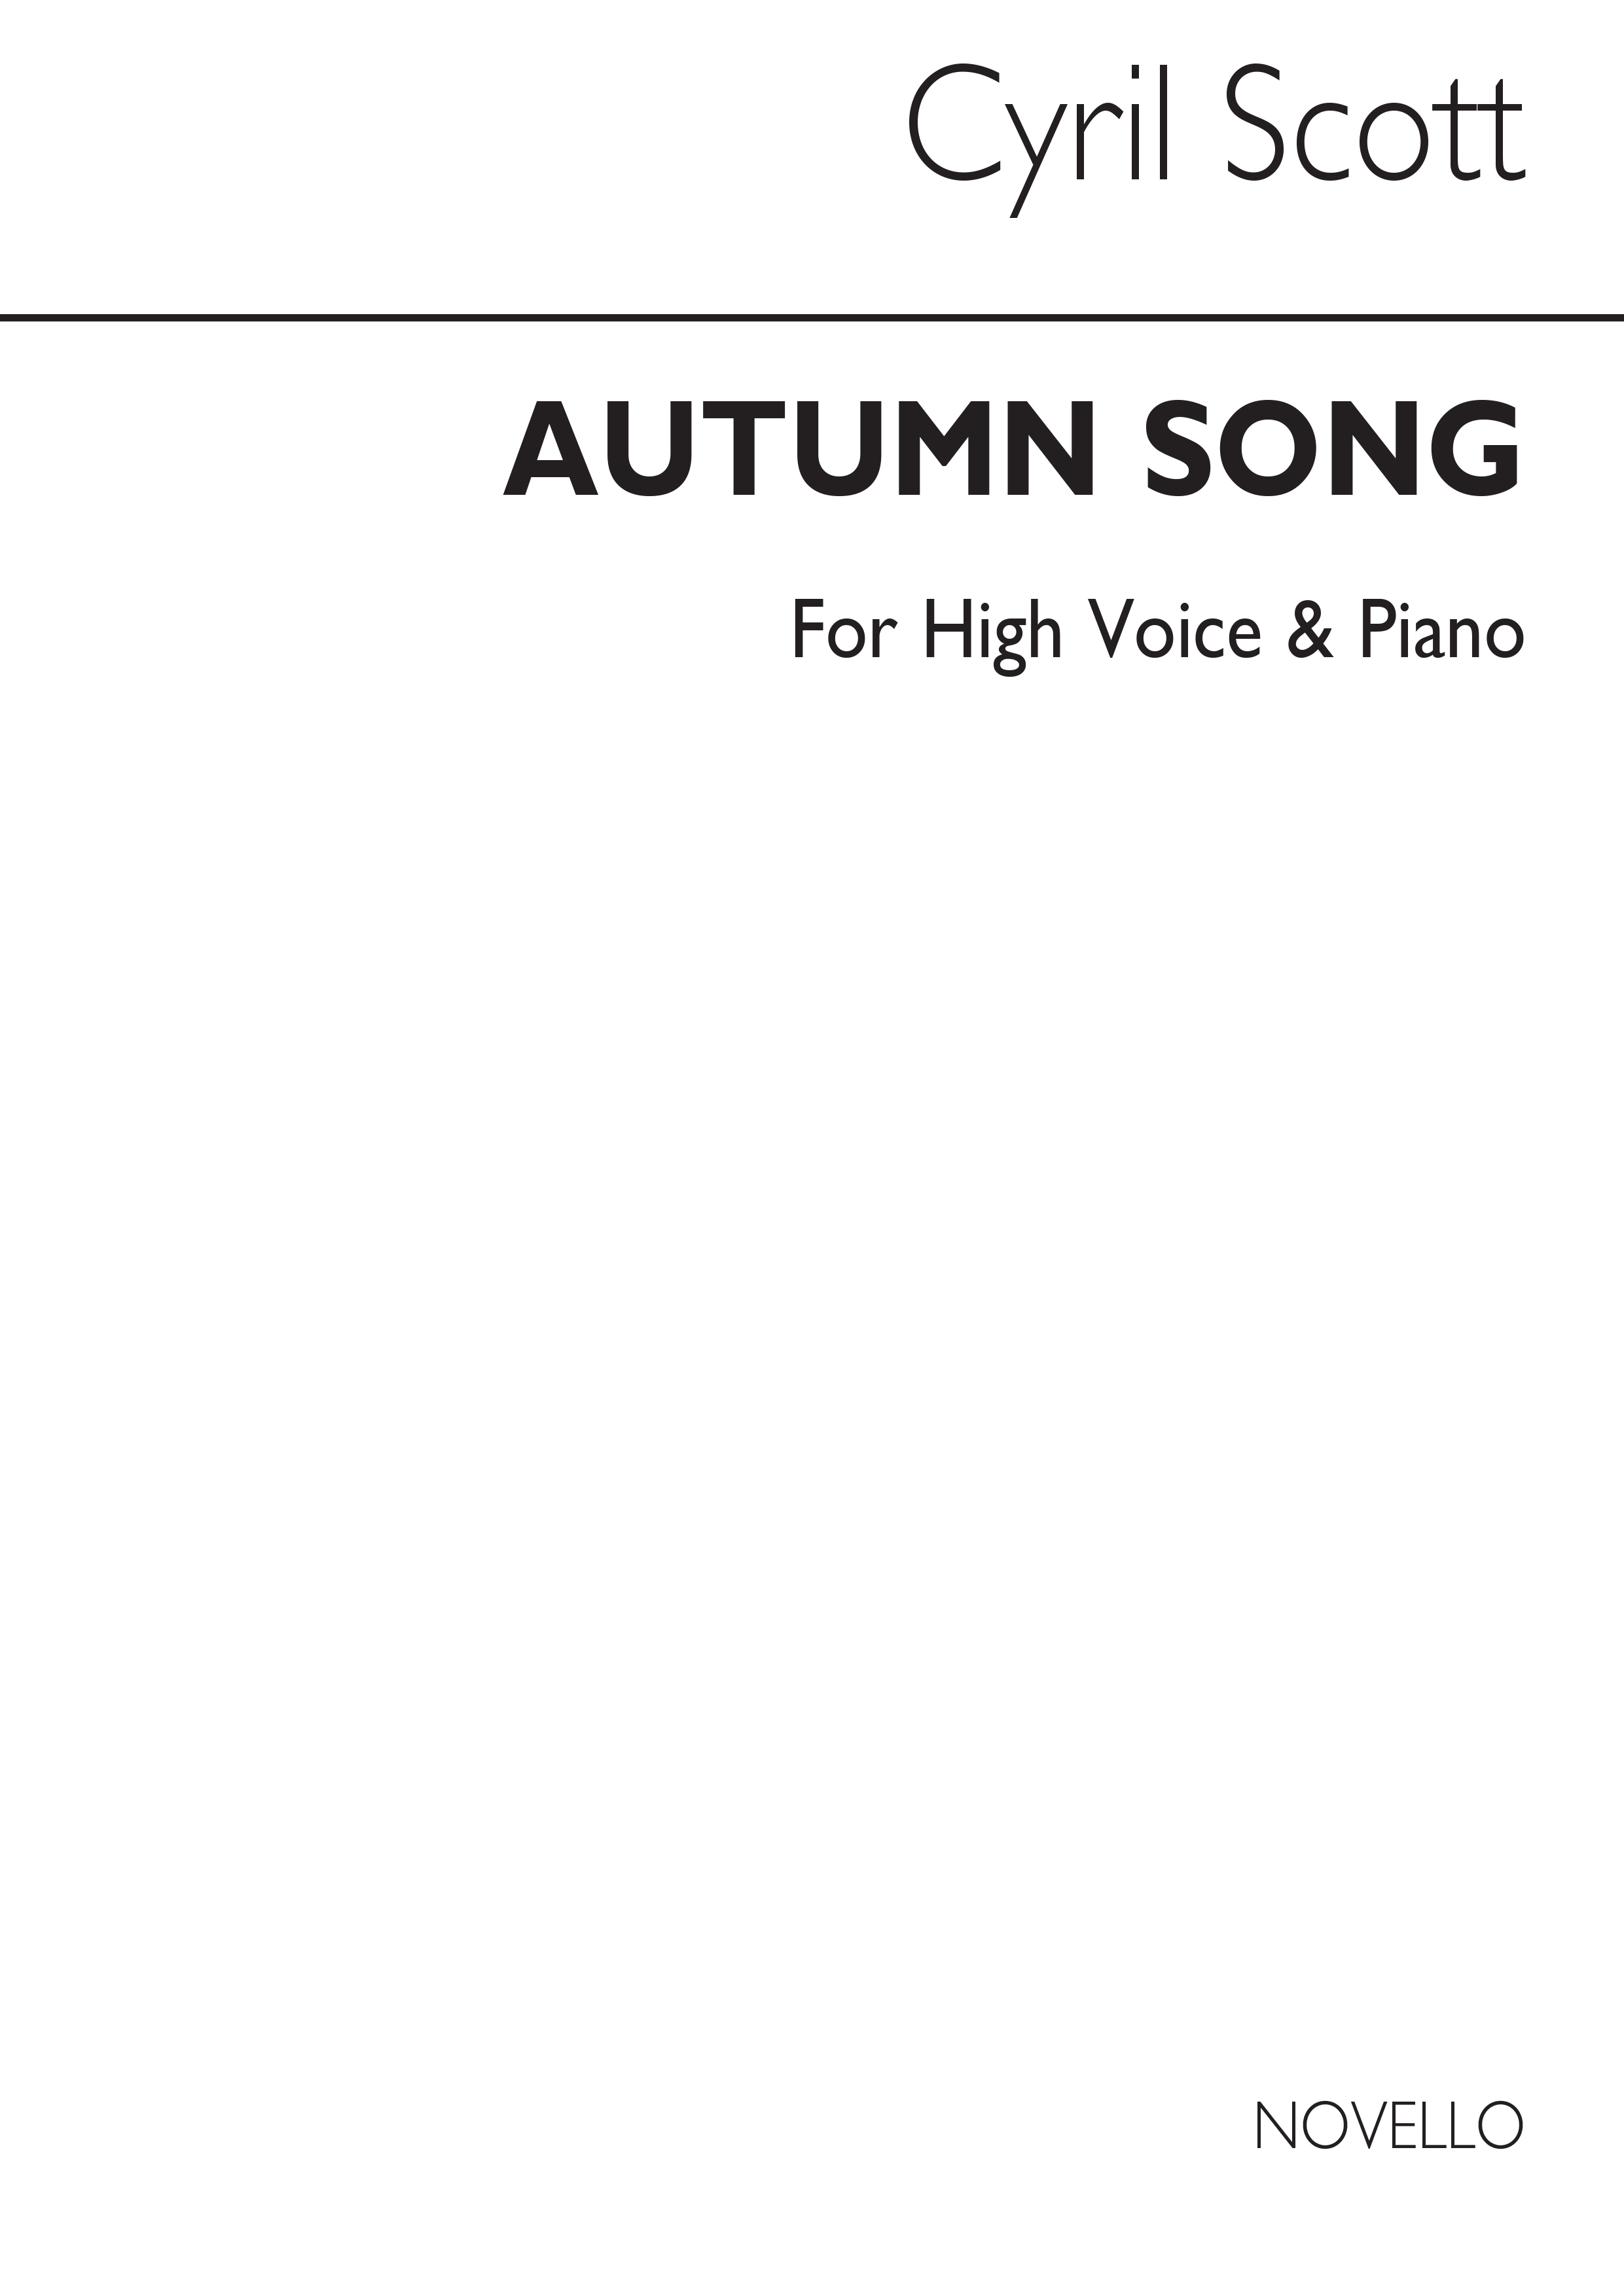 Cyril Scott: Autumn Song-high Voice/Piano (Key-d)